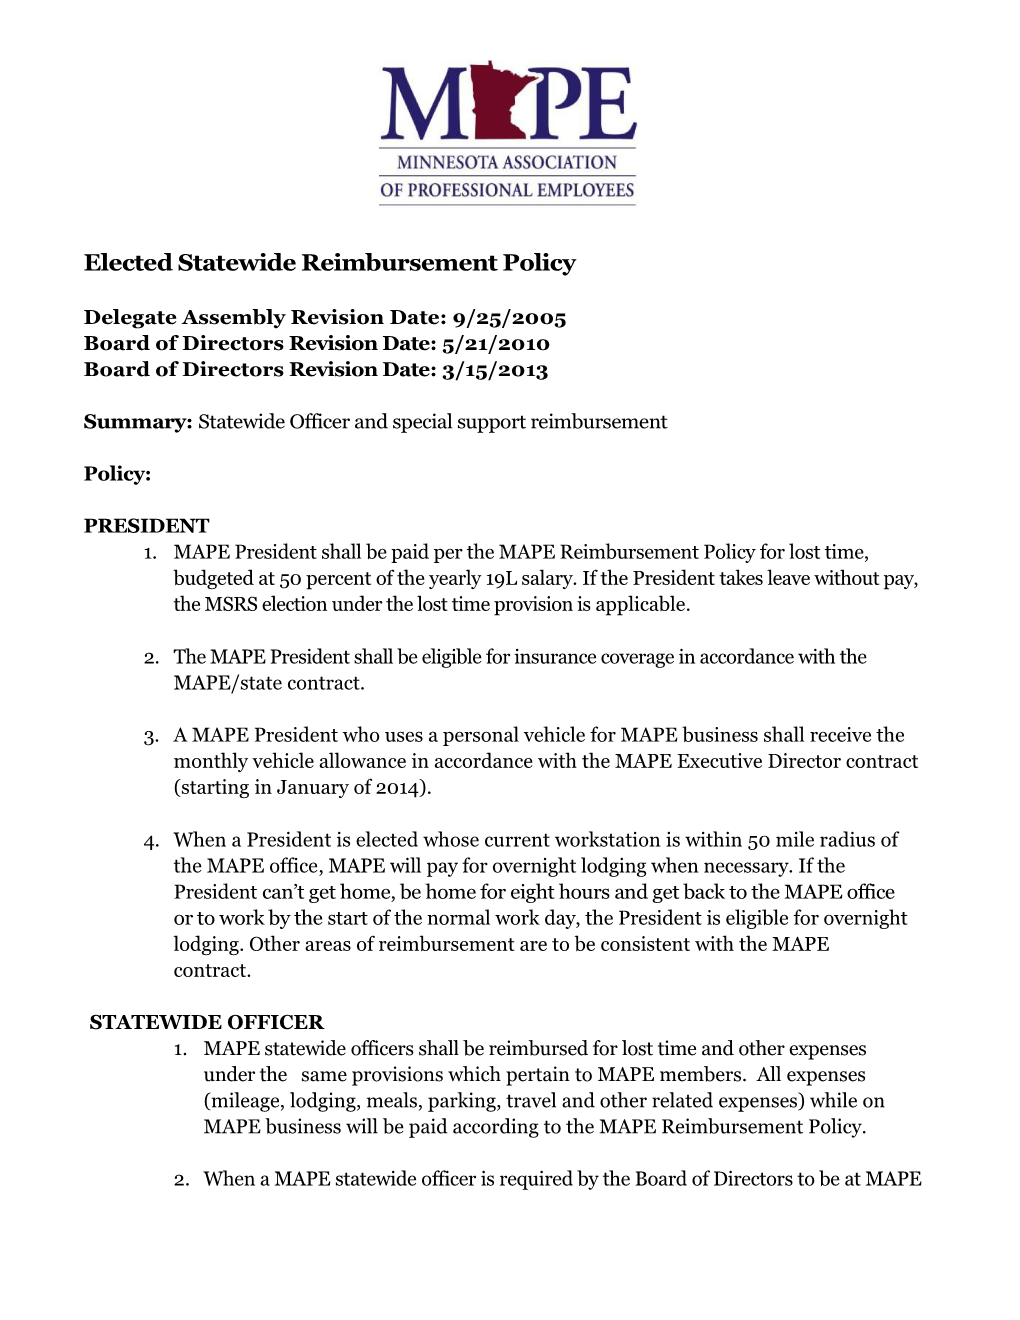 Elected Statewide Reimbursement Policy